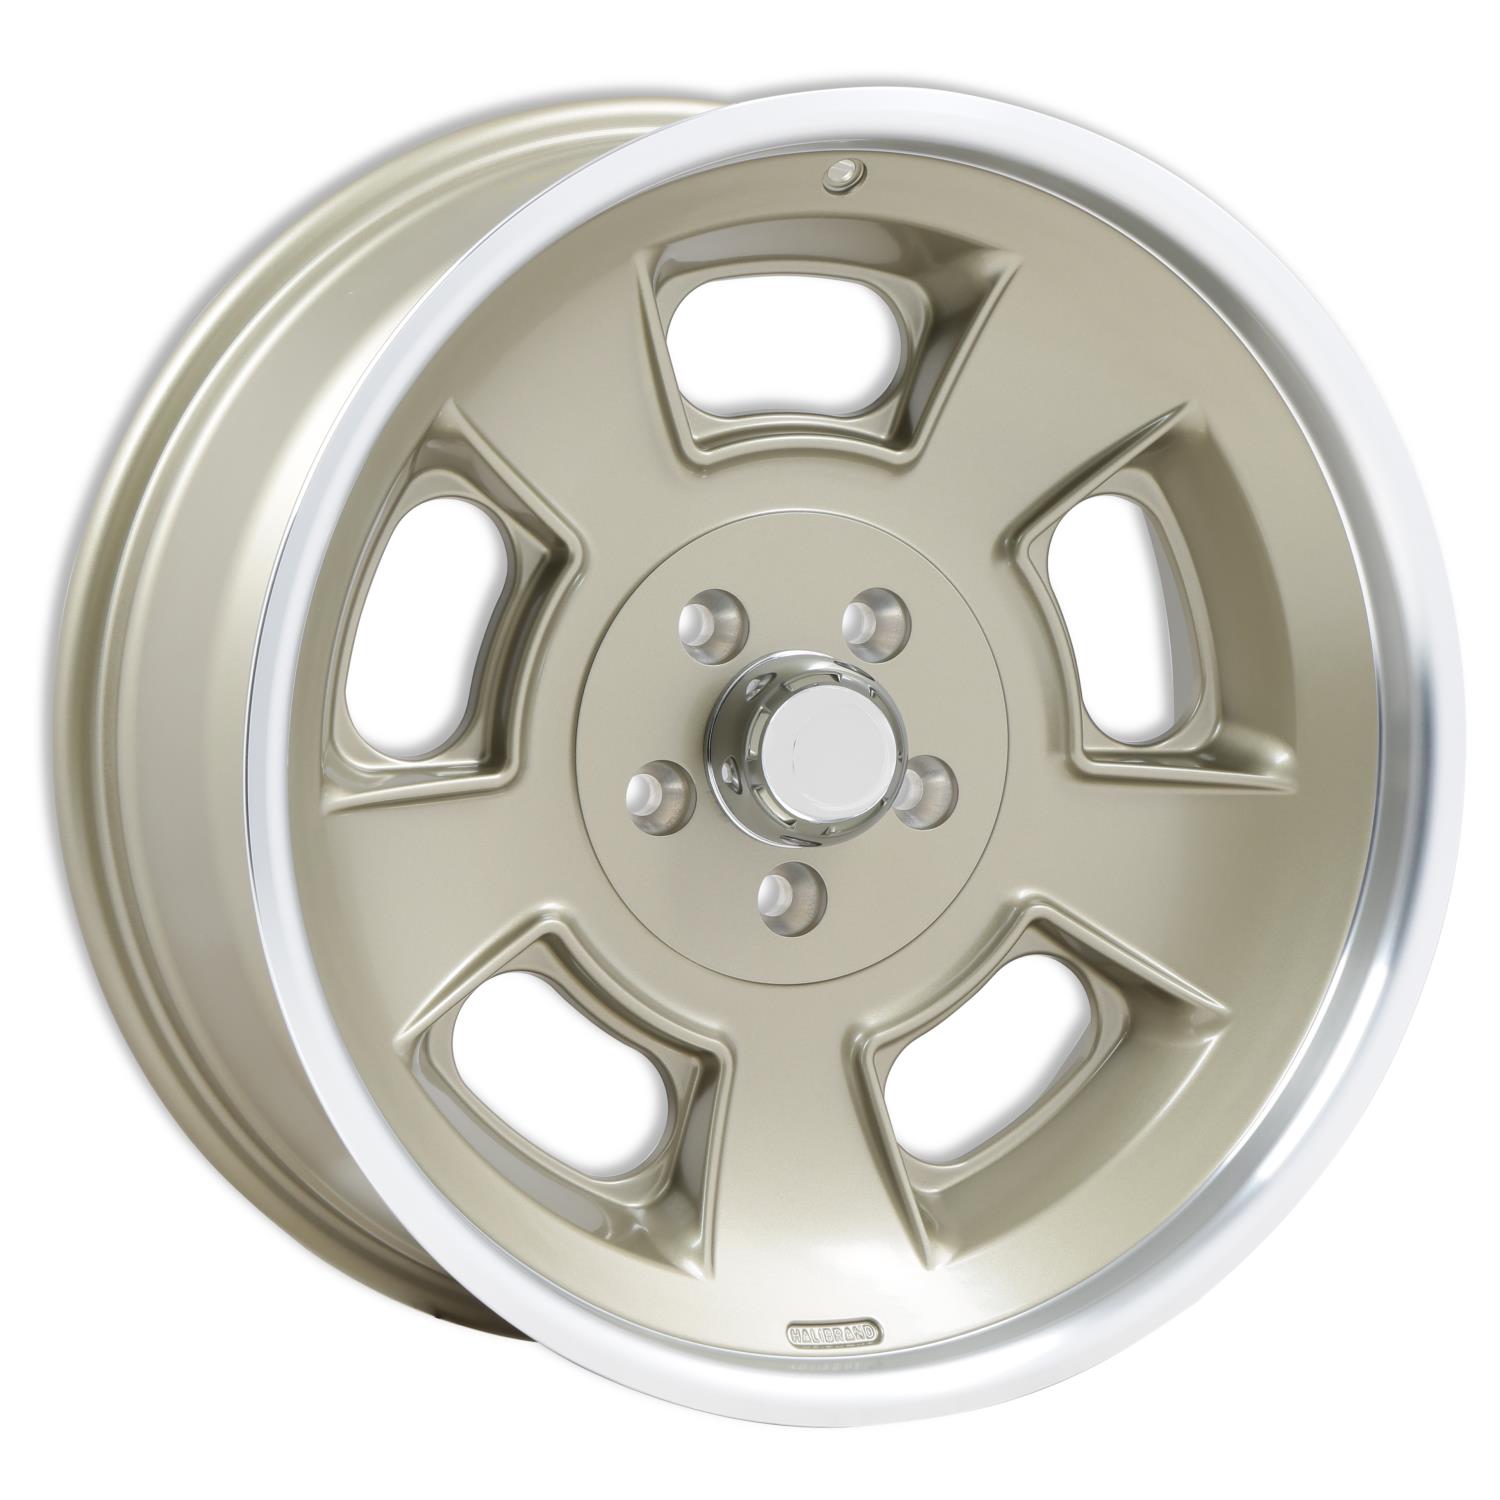 Sprint Front Wheel, Size: 20x8.5", Bolt Pattern: 5x5", Backspace: 4.75" [MAG7 with Machined Lip - Semi Gloss Clearcoat]